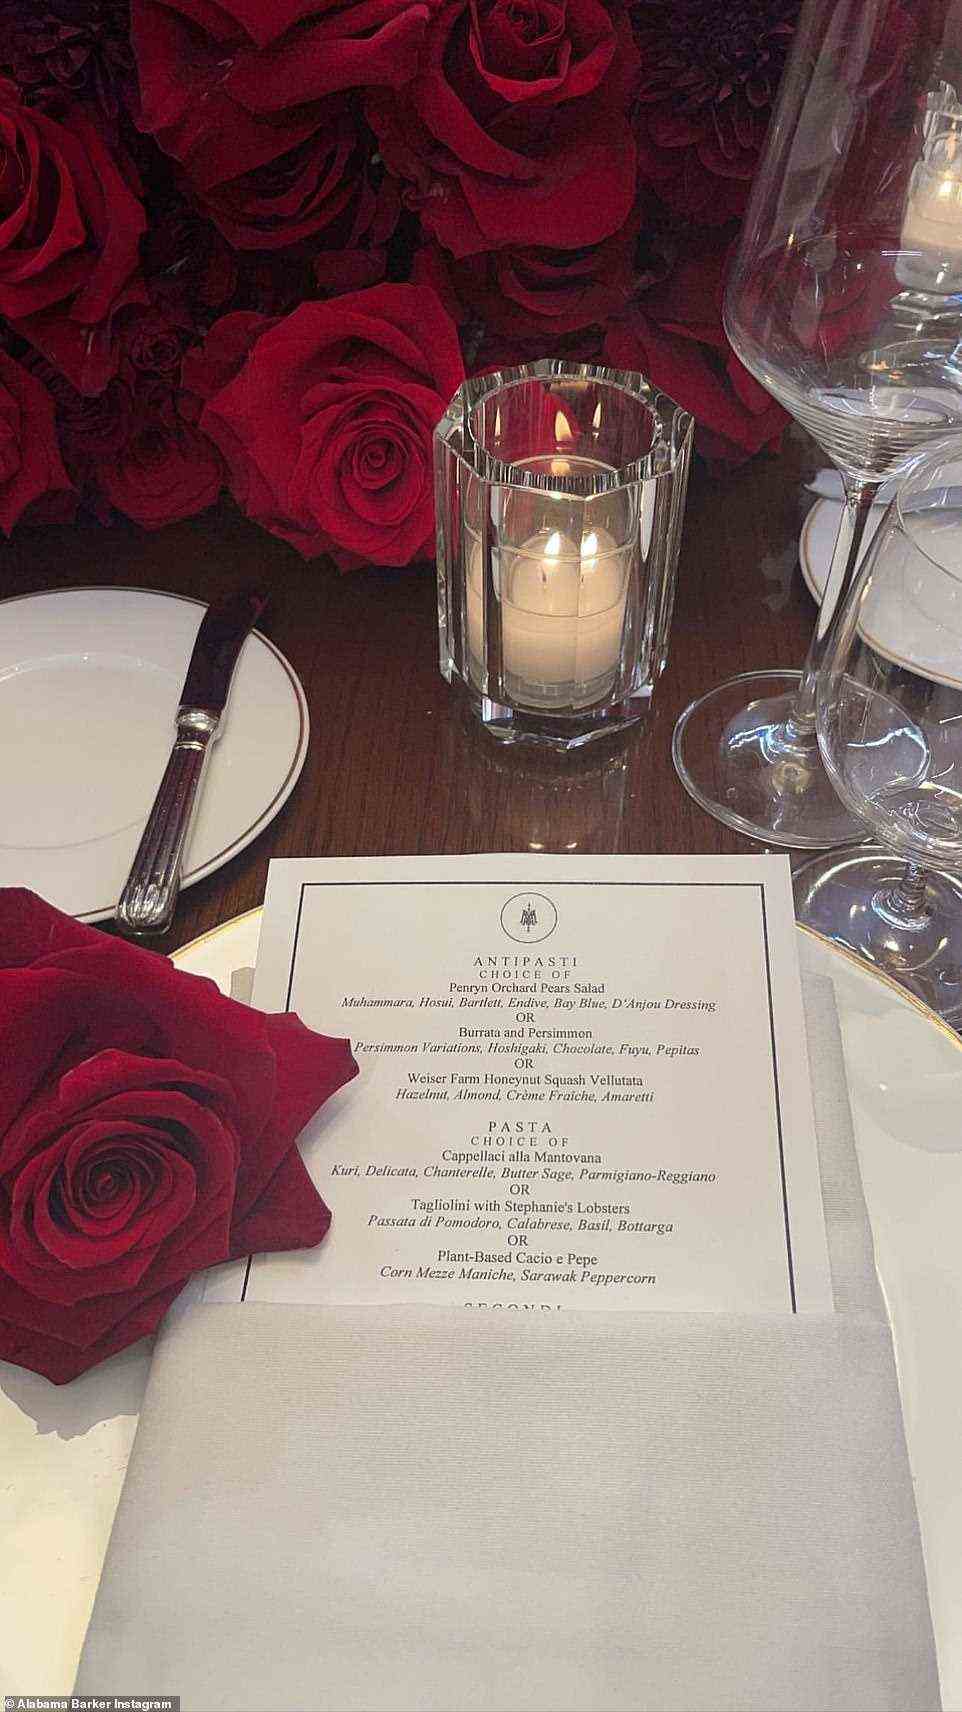 Menu: A close up look at the menu and tablescape for the engagement dinner was seen